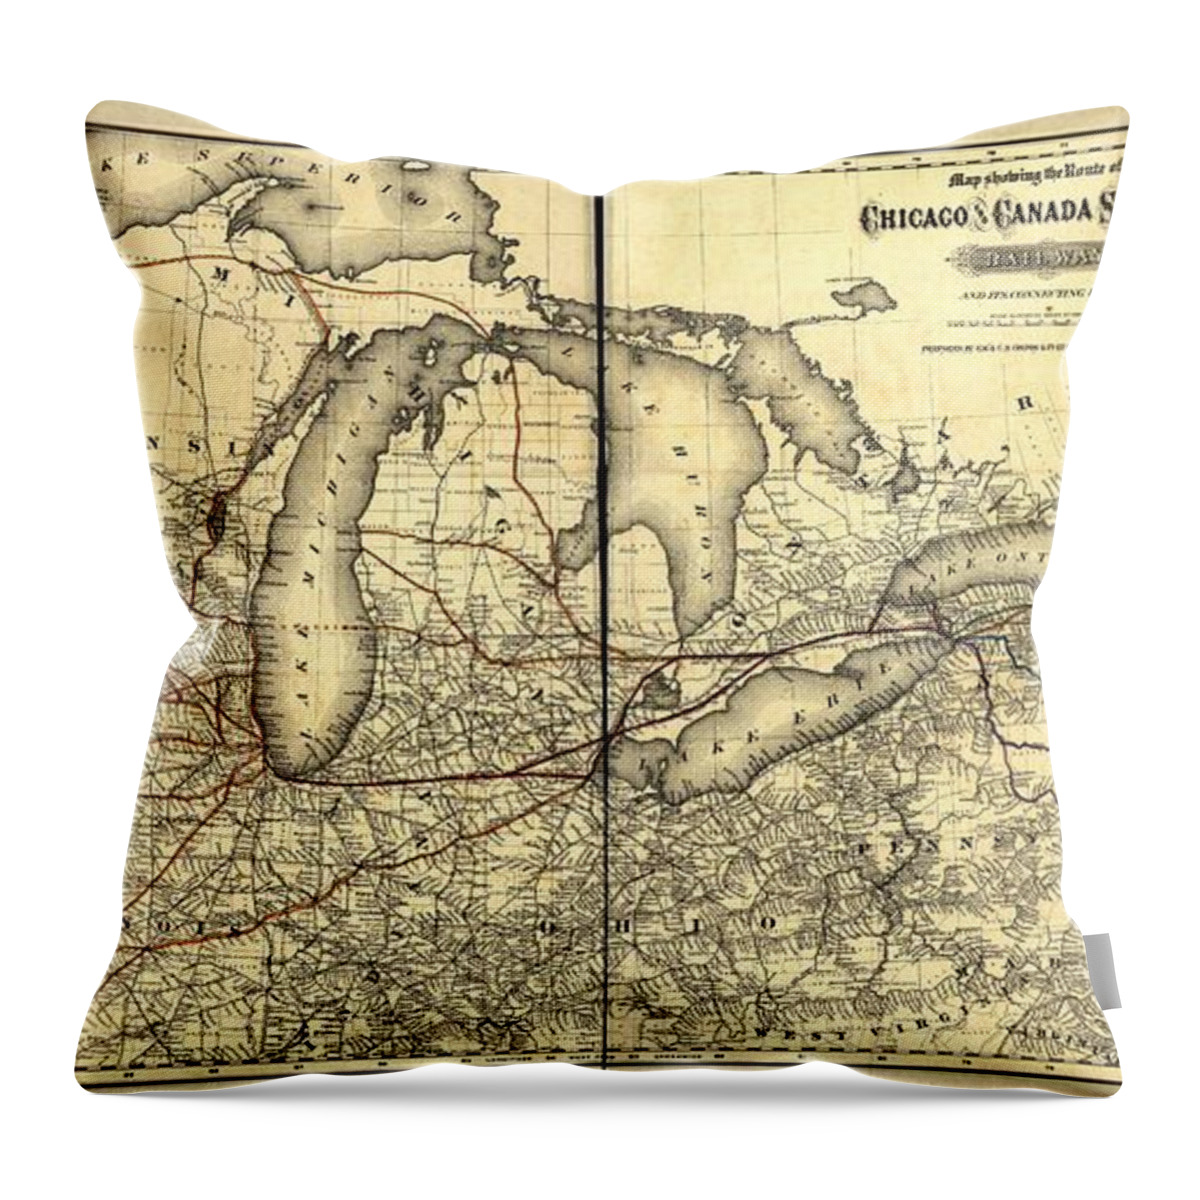 Vintage Throw Pillow featuring the photograph Chicago and Canada Southern Railway Route Map by Georgia Fowler